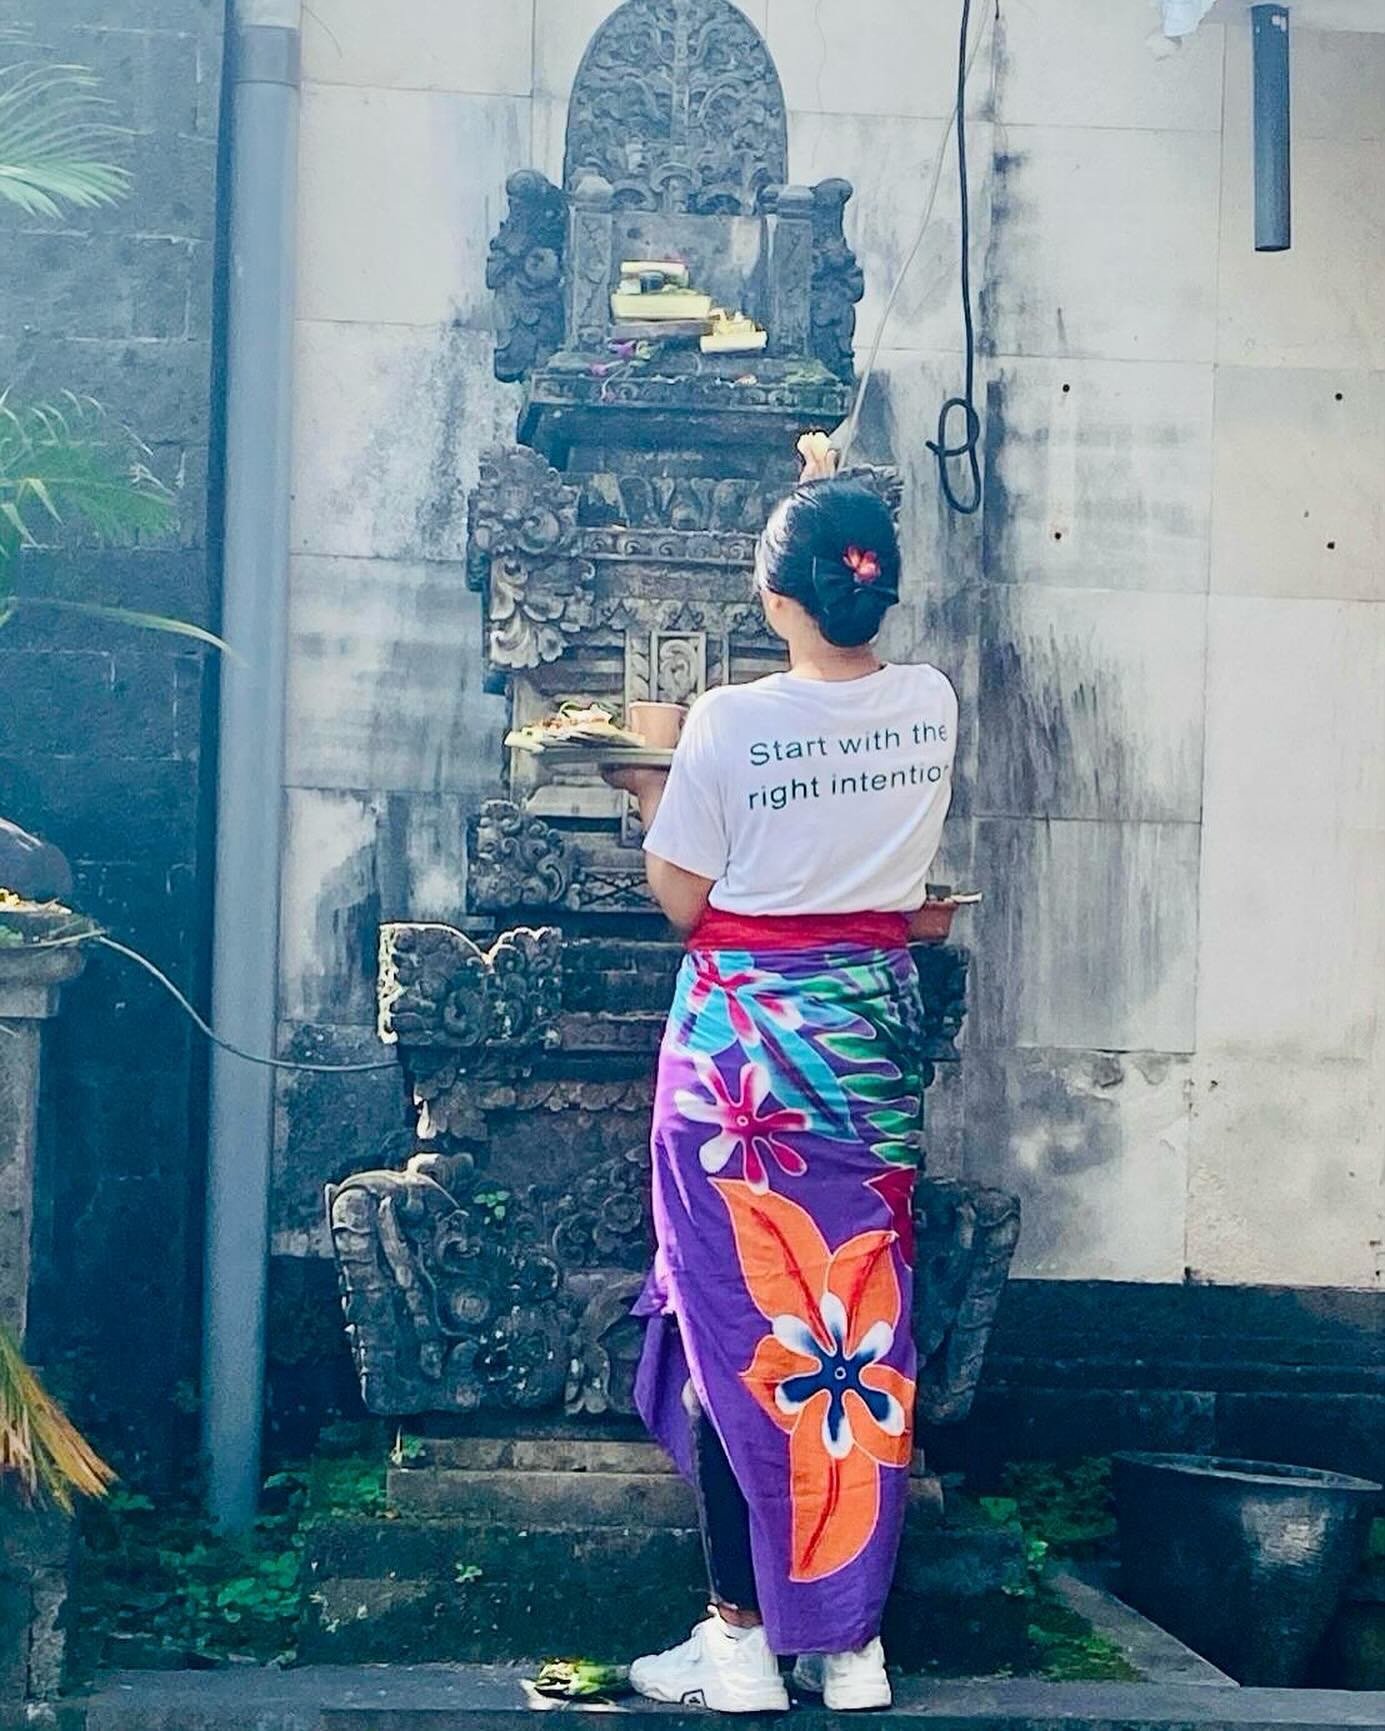 &ldquo;Start with the right intention.&rdquo; I was walking down the street when I noticed this woman doing her offerings and saw her shirt! Just hours before the retreat began, It was like magical sign from the universe. ❤️🌺🌴 Start the retreat wit